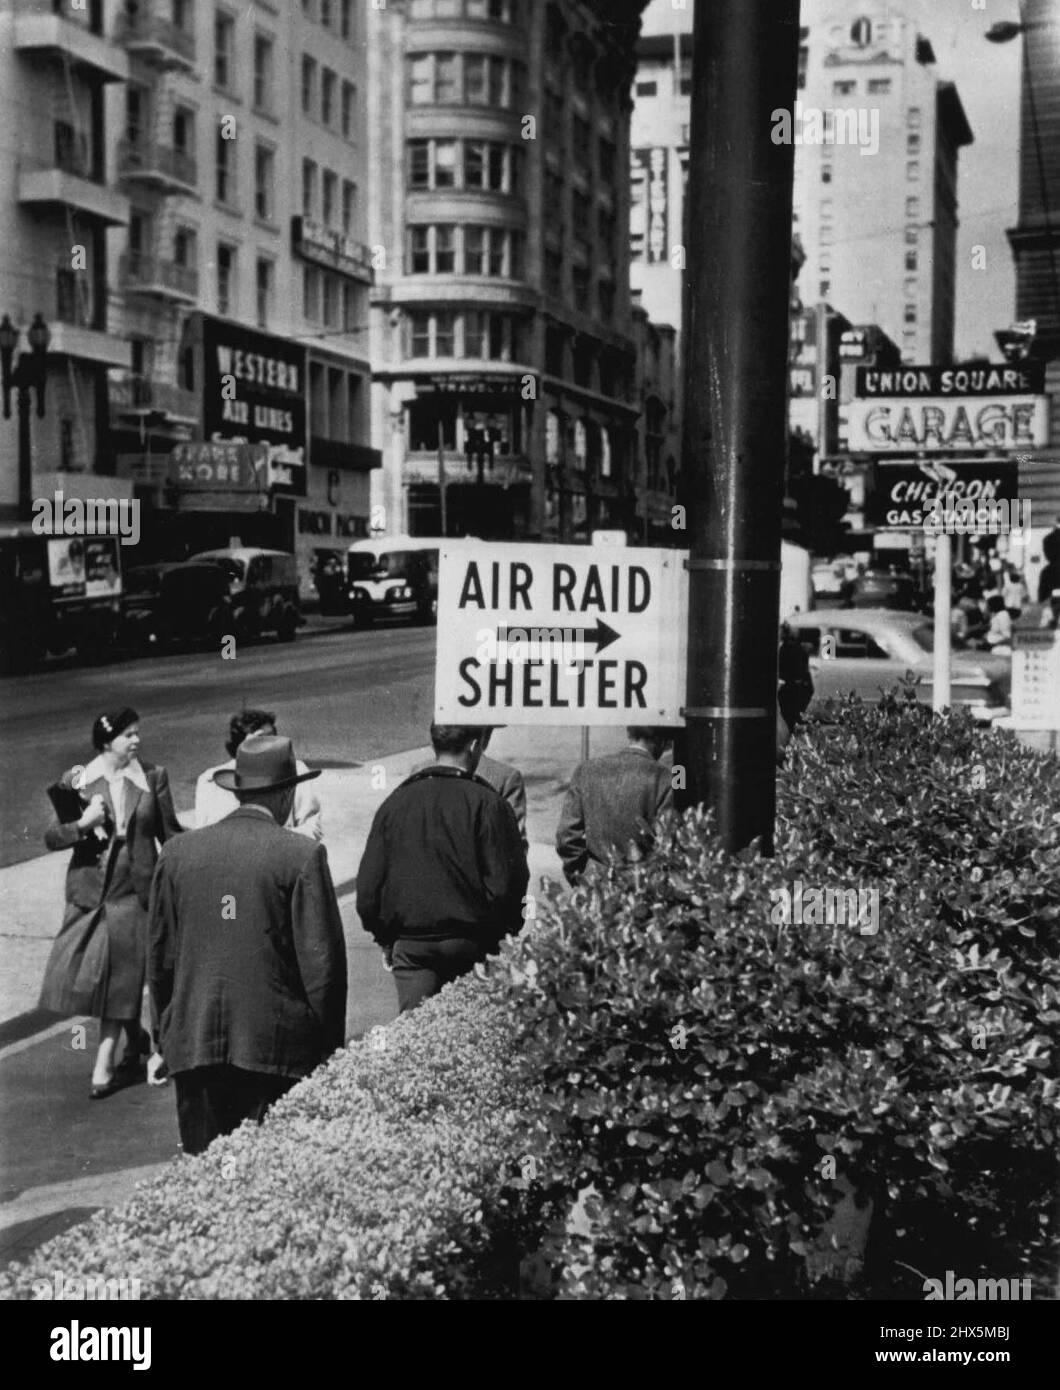 Air Raid Shelter Signs Go Up -- For the first time since World War II air raid shelter signs were posted in San Francisco today. This sign is posted on the Geary street entrance to an underground garage built four stories below San Francisco's historical Union square. June 06, 1951. (Photo by AP Wirephoto). Stock Photo